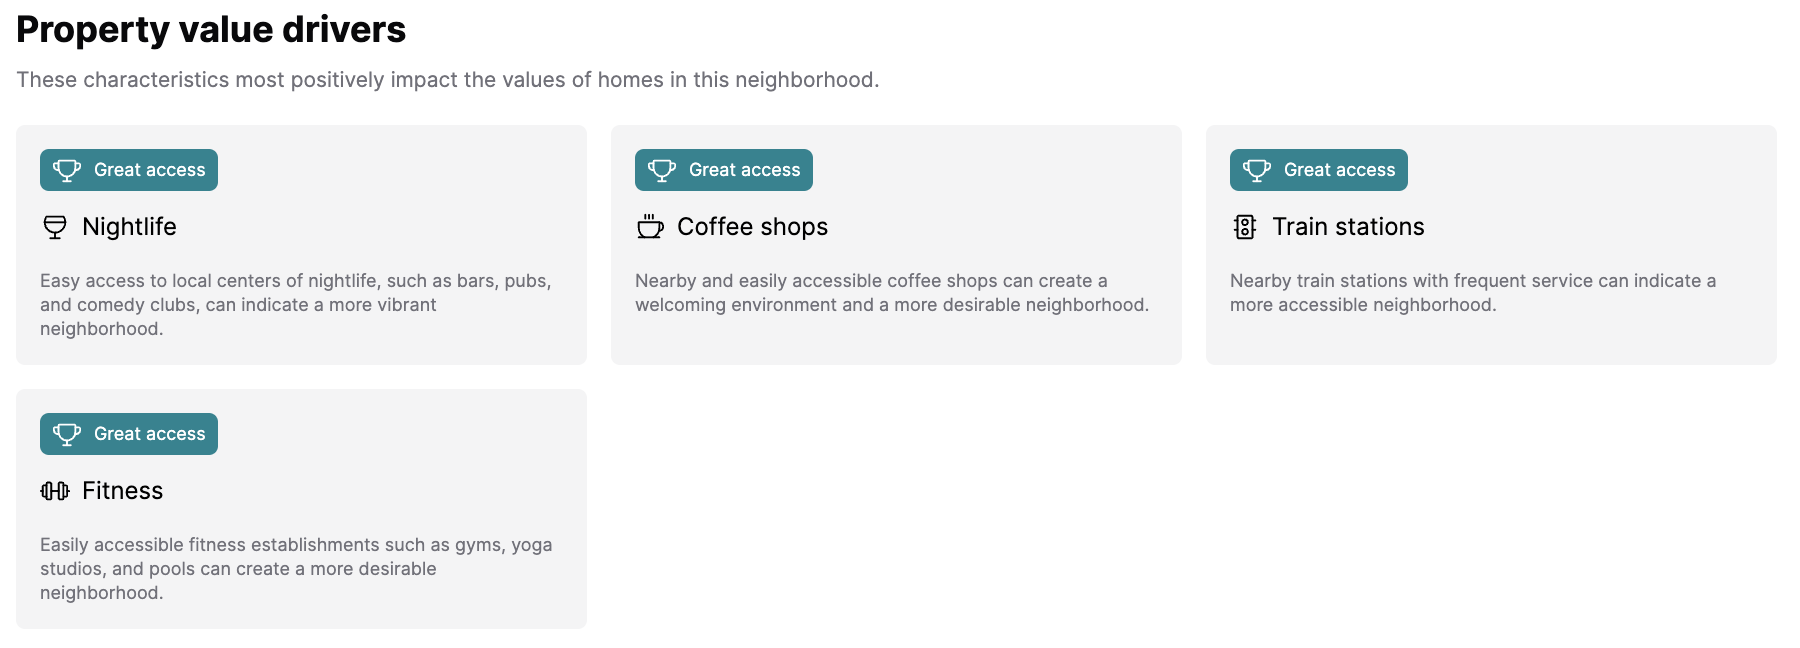 New Feature (Value Drivers) added to Local Logic's NeighborhoodWrap